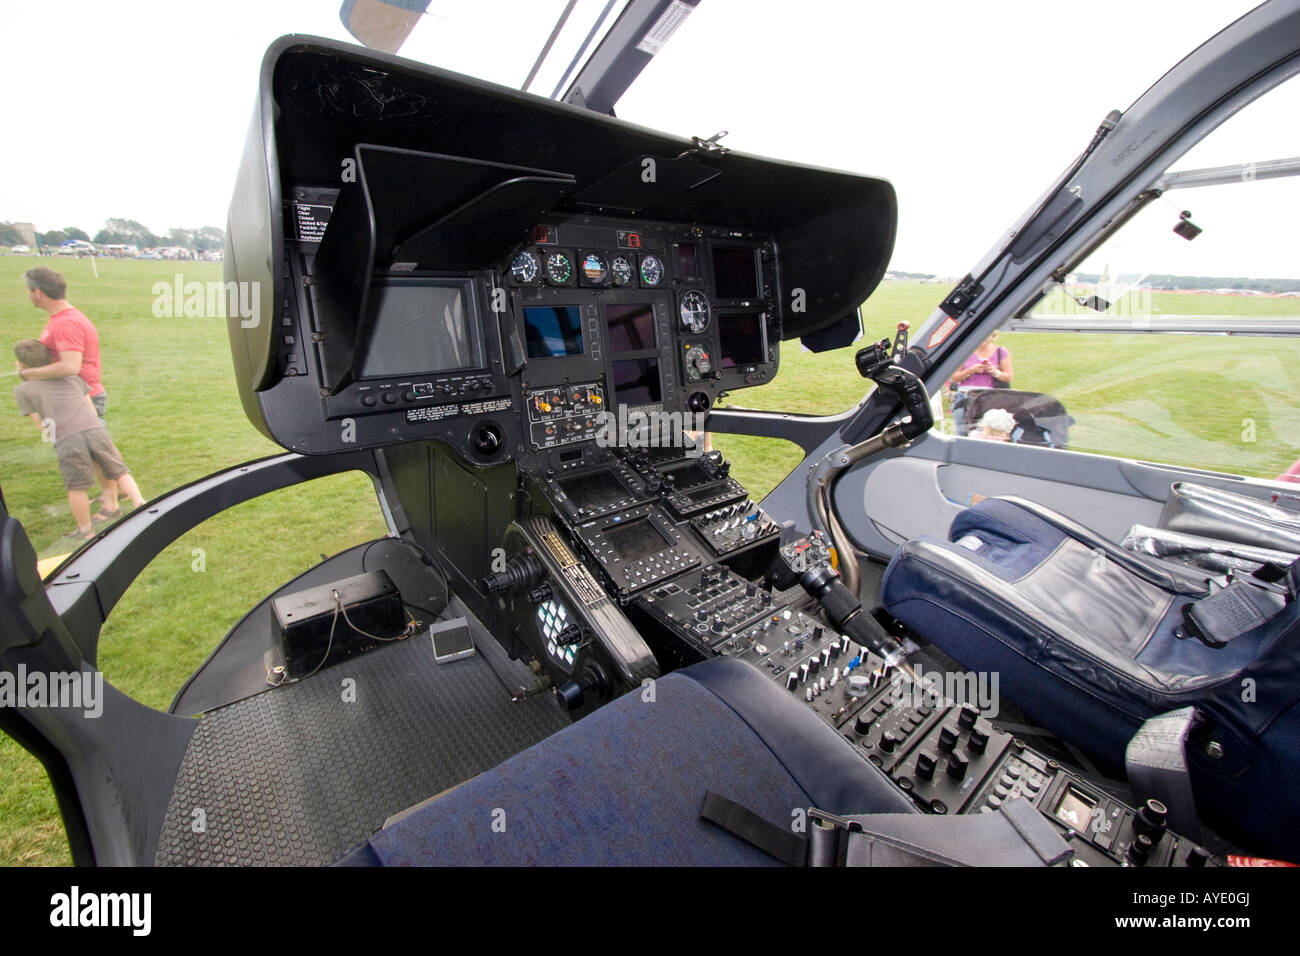 Cockpit controls and flight deck instruments in front of police helicopter Stock Photo